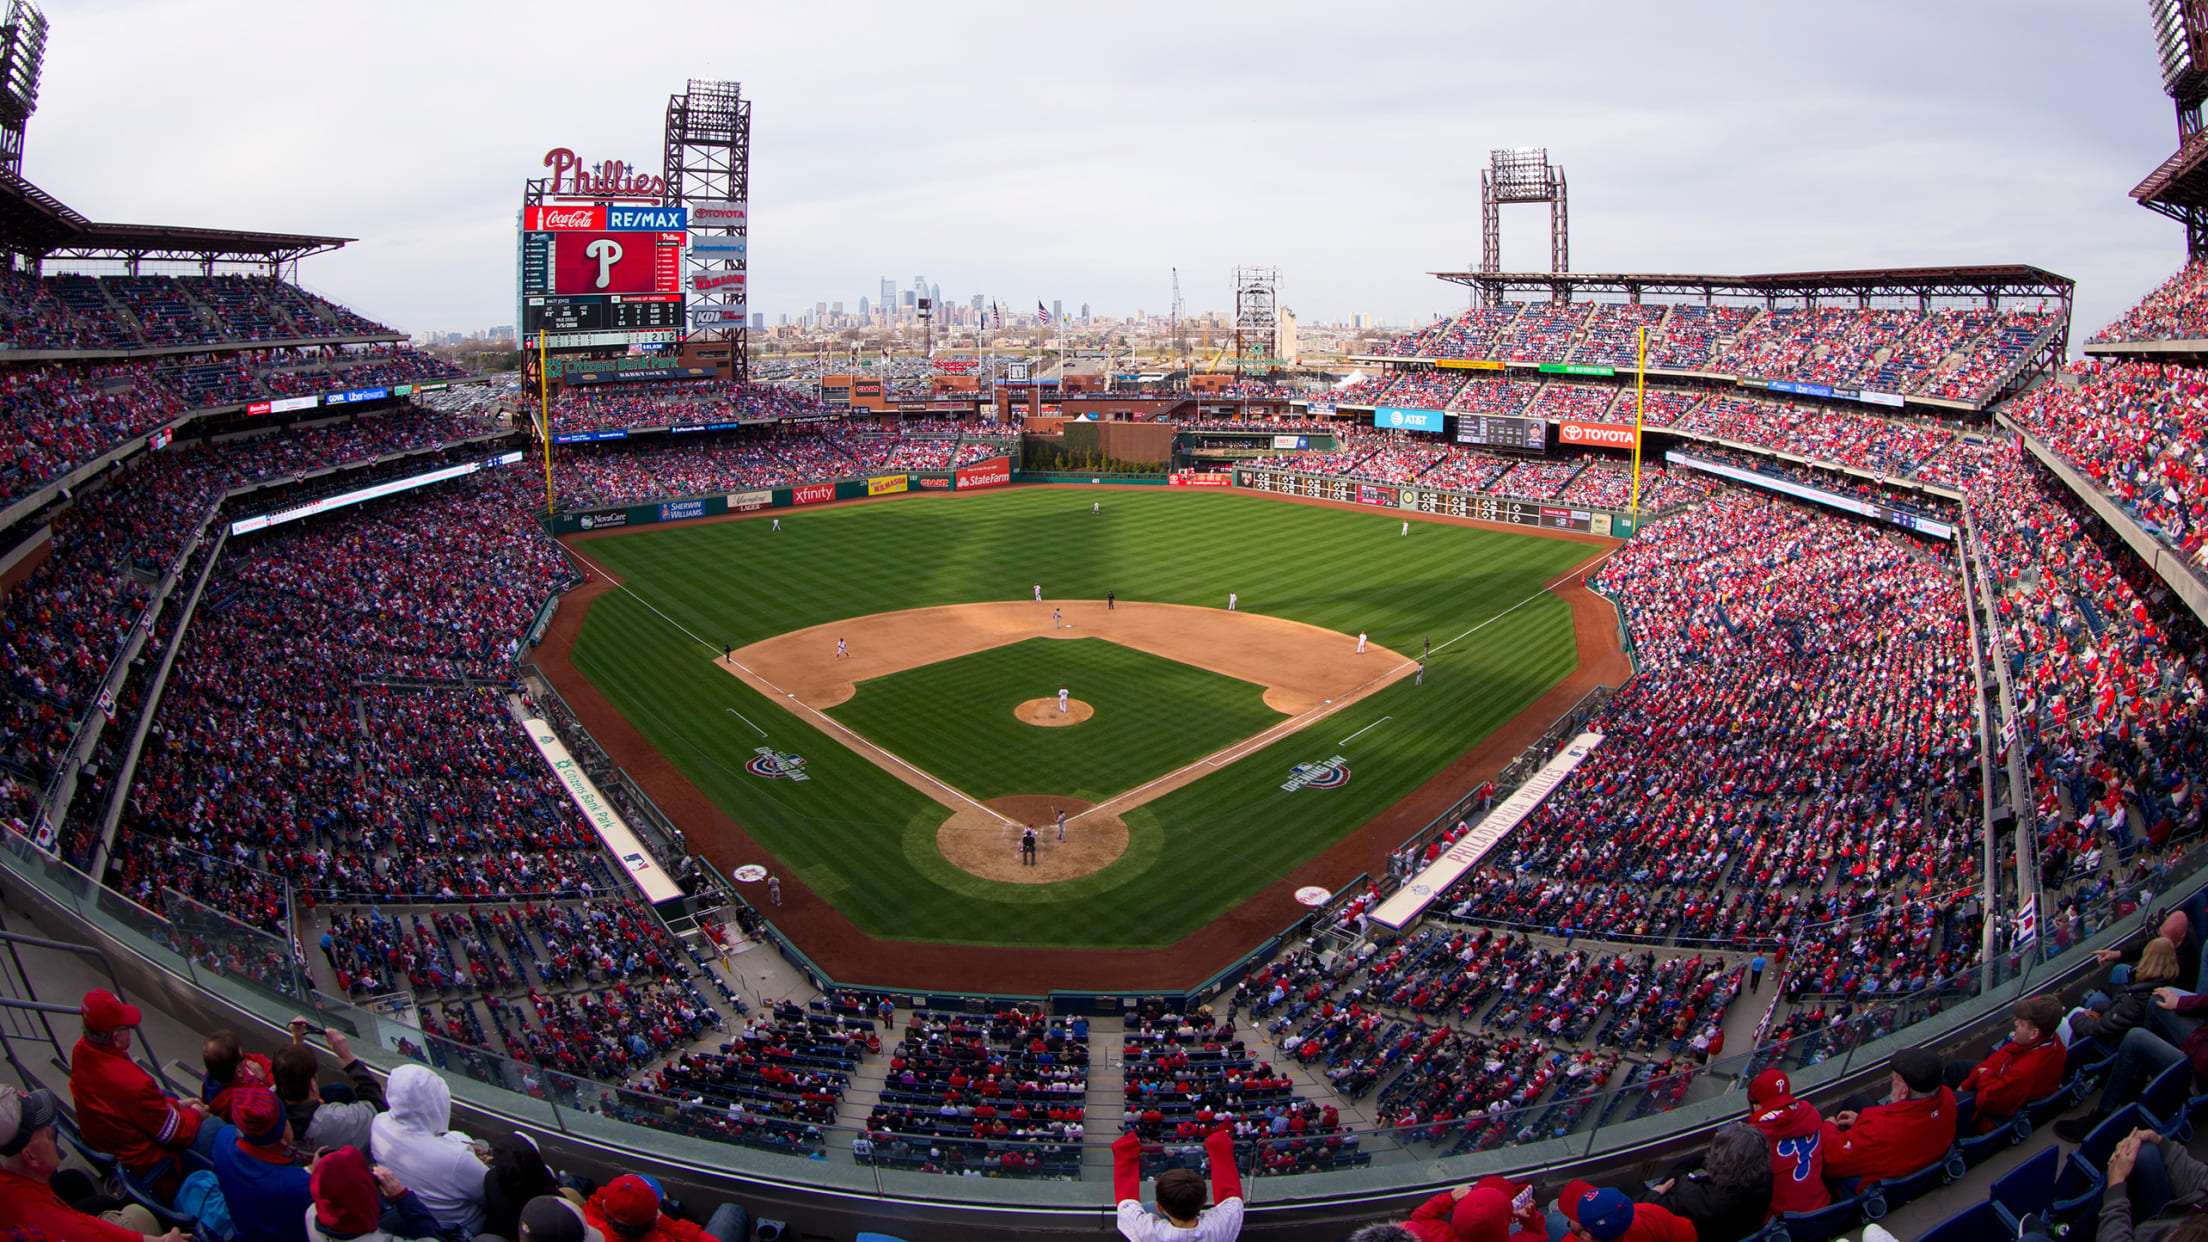 Citizens Bank Park Seating Map